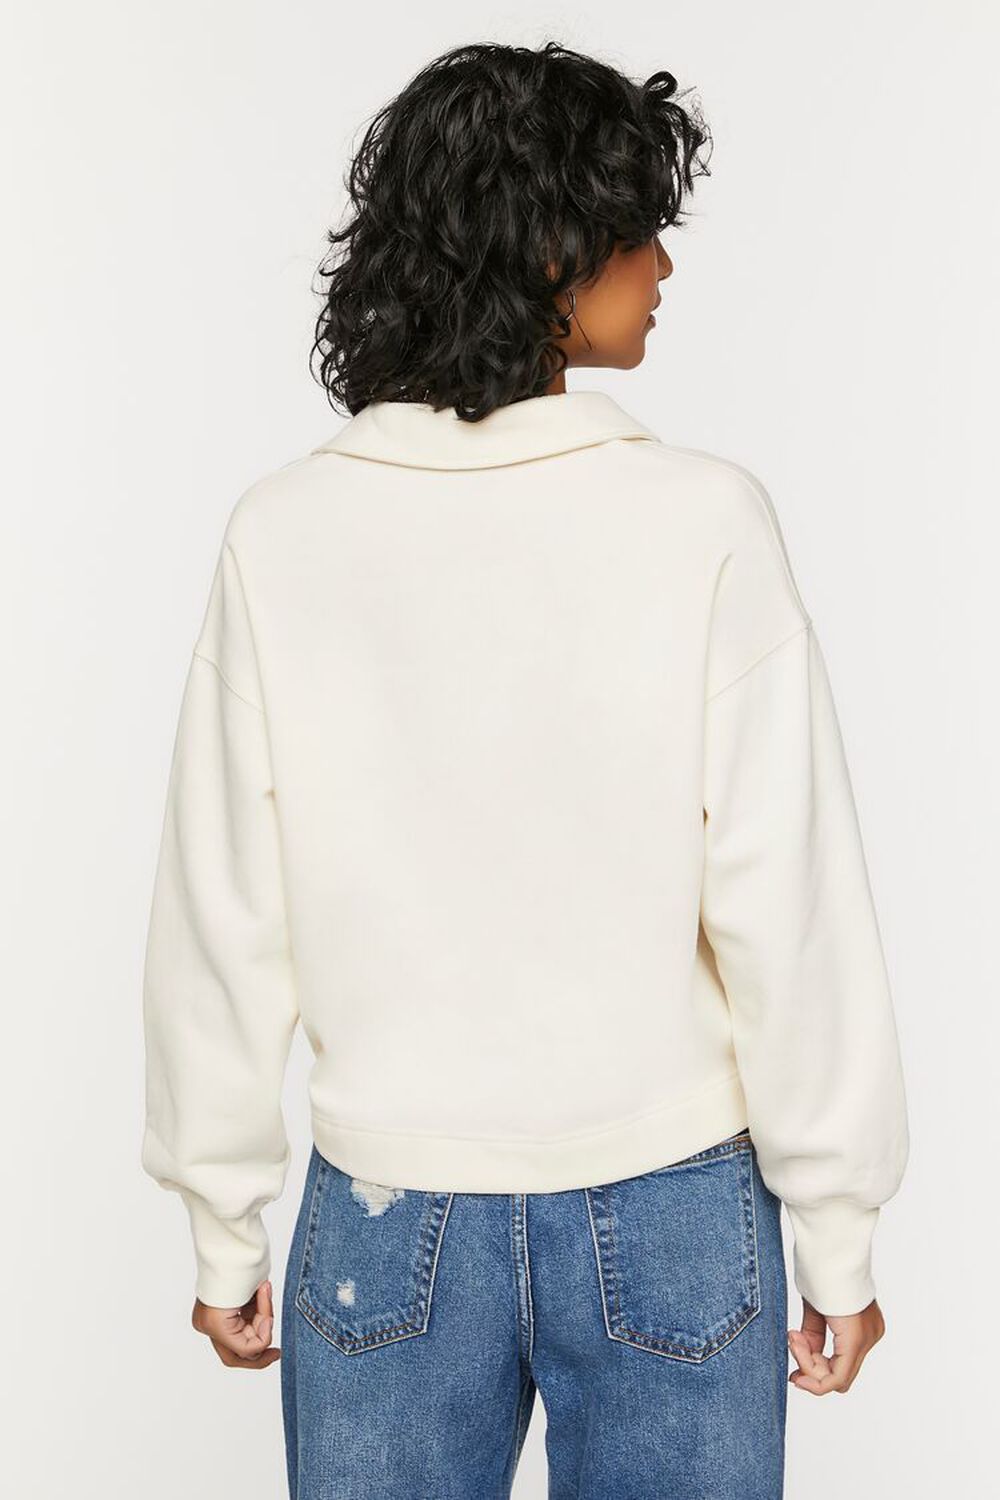 CREAM Collared Drop-Sleeve Pullover, image 3